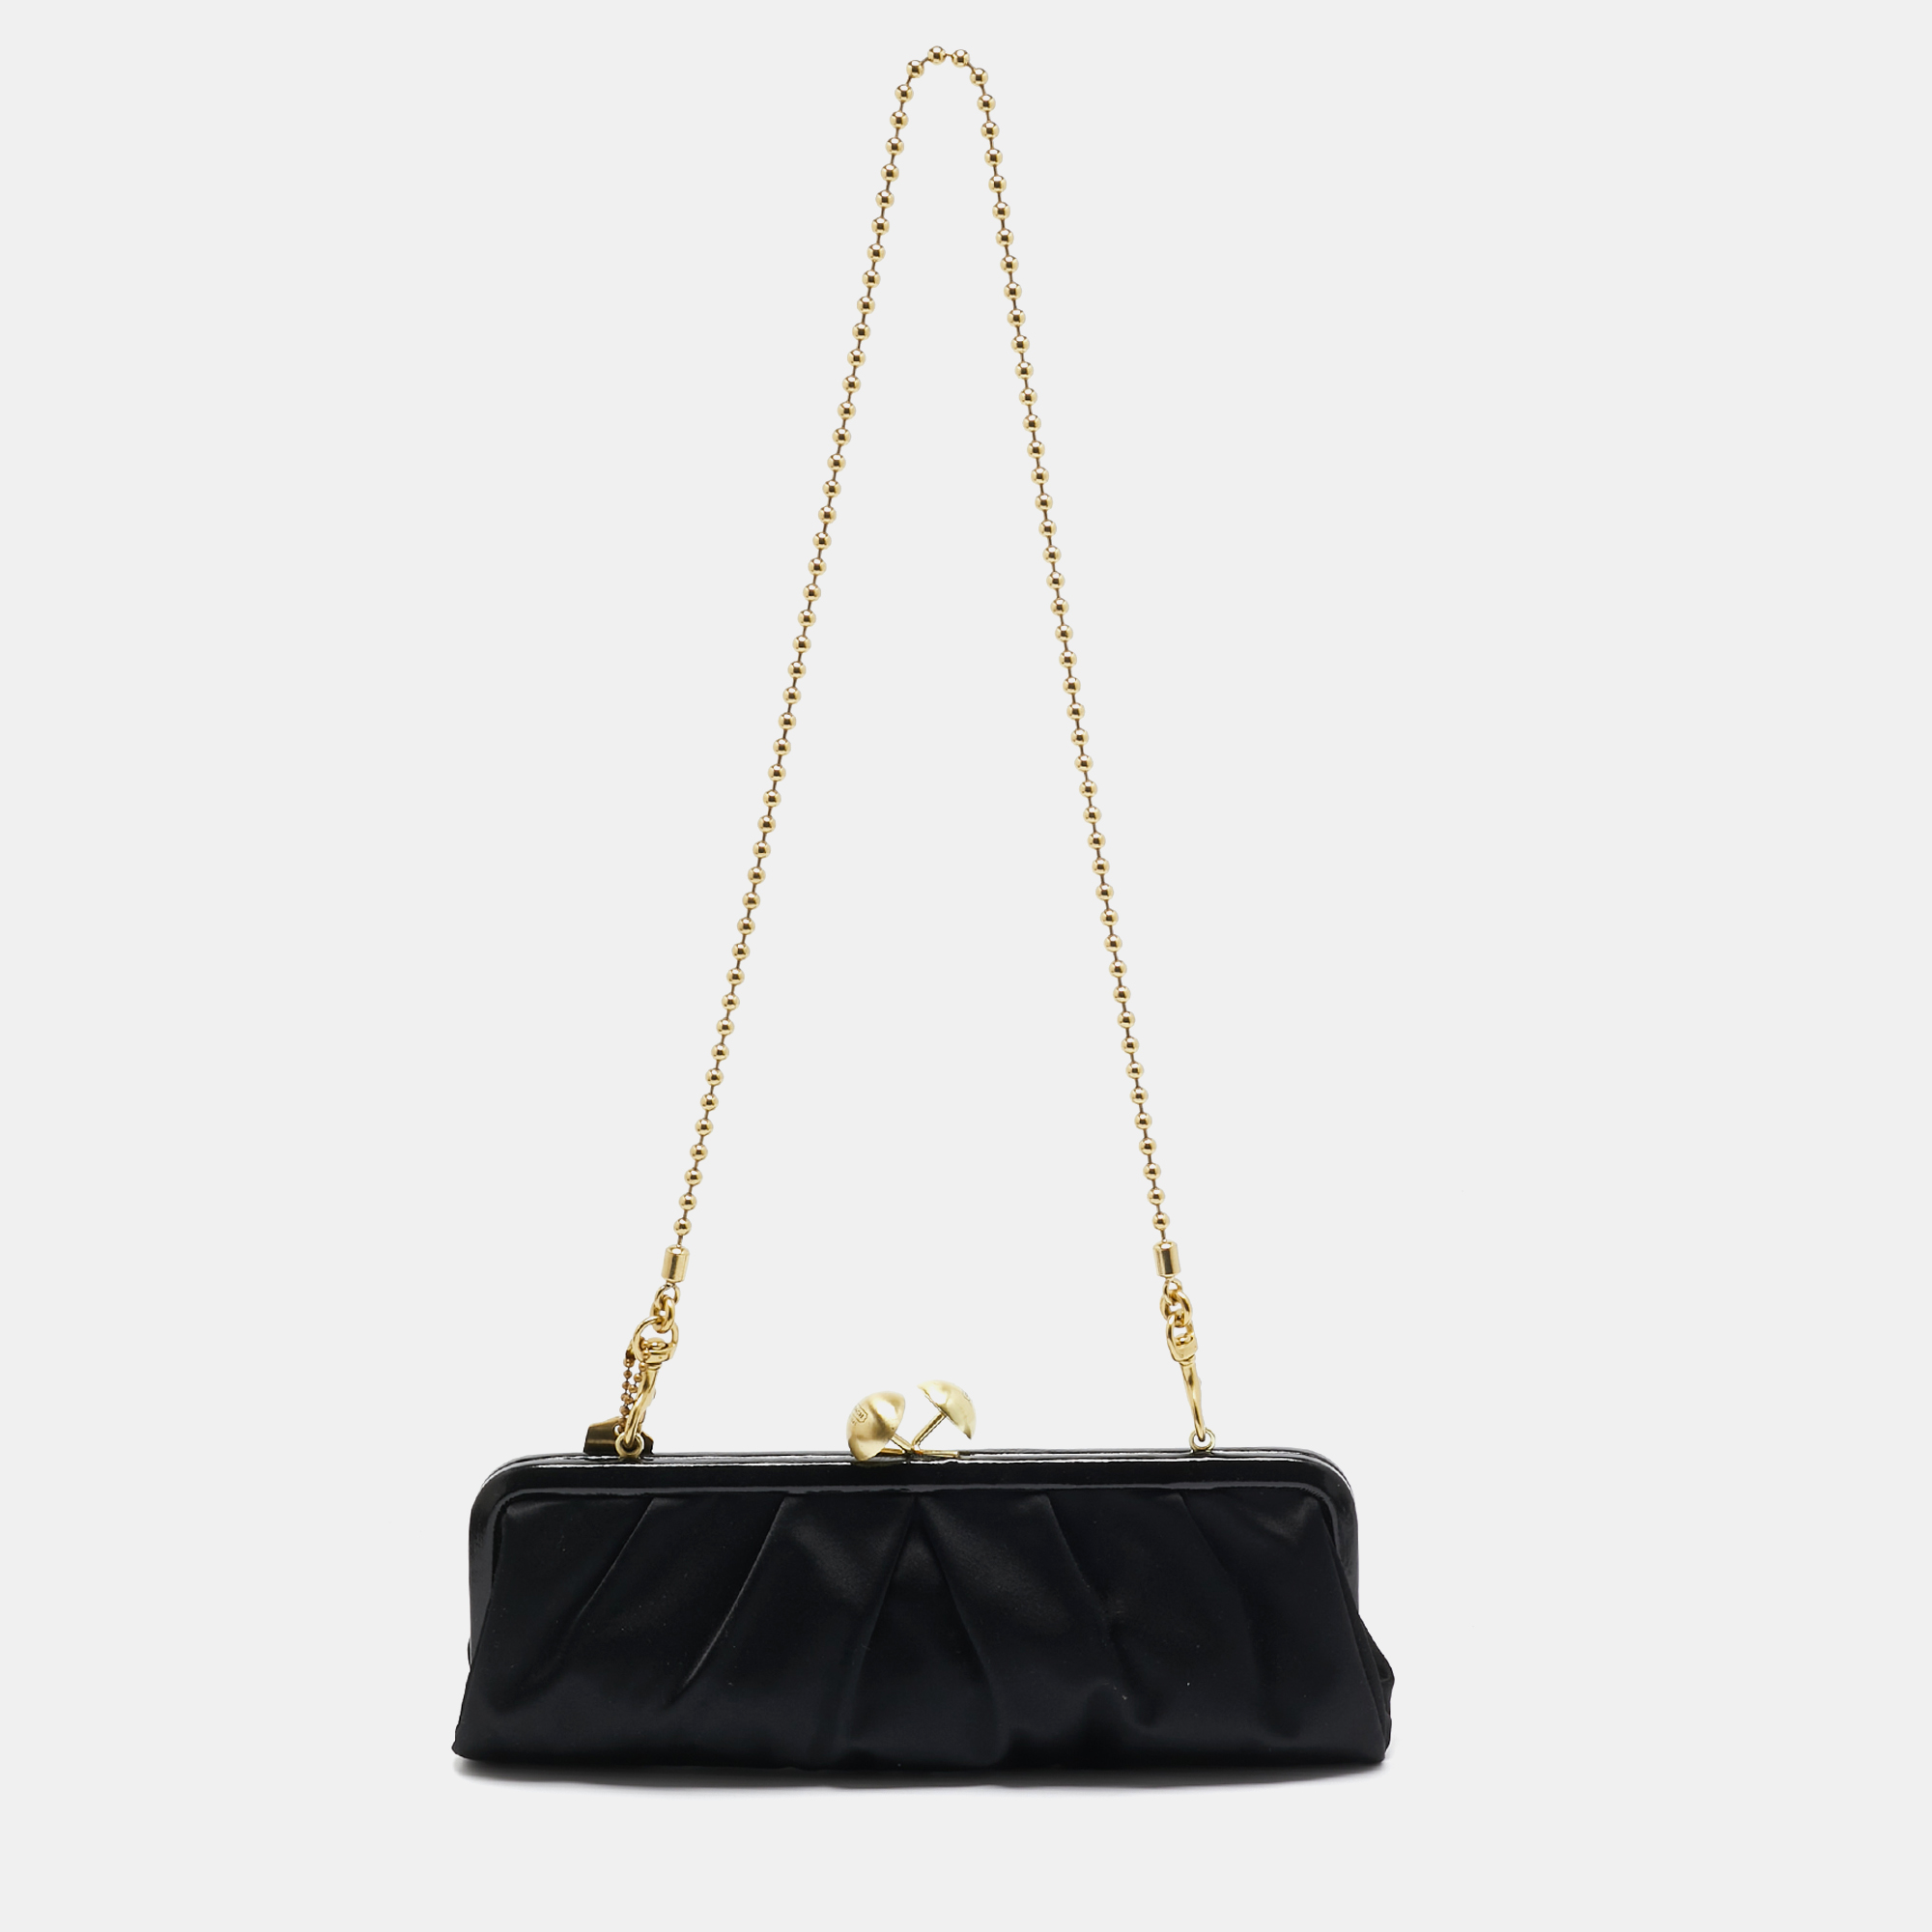 

Coach Black Satin and Patent Leather Kiss Lock Chain Clutch